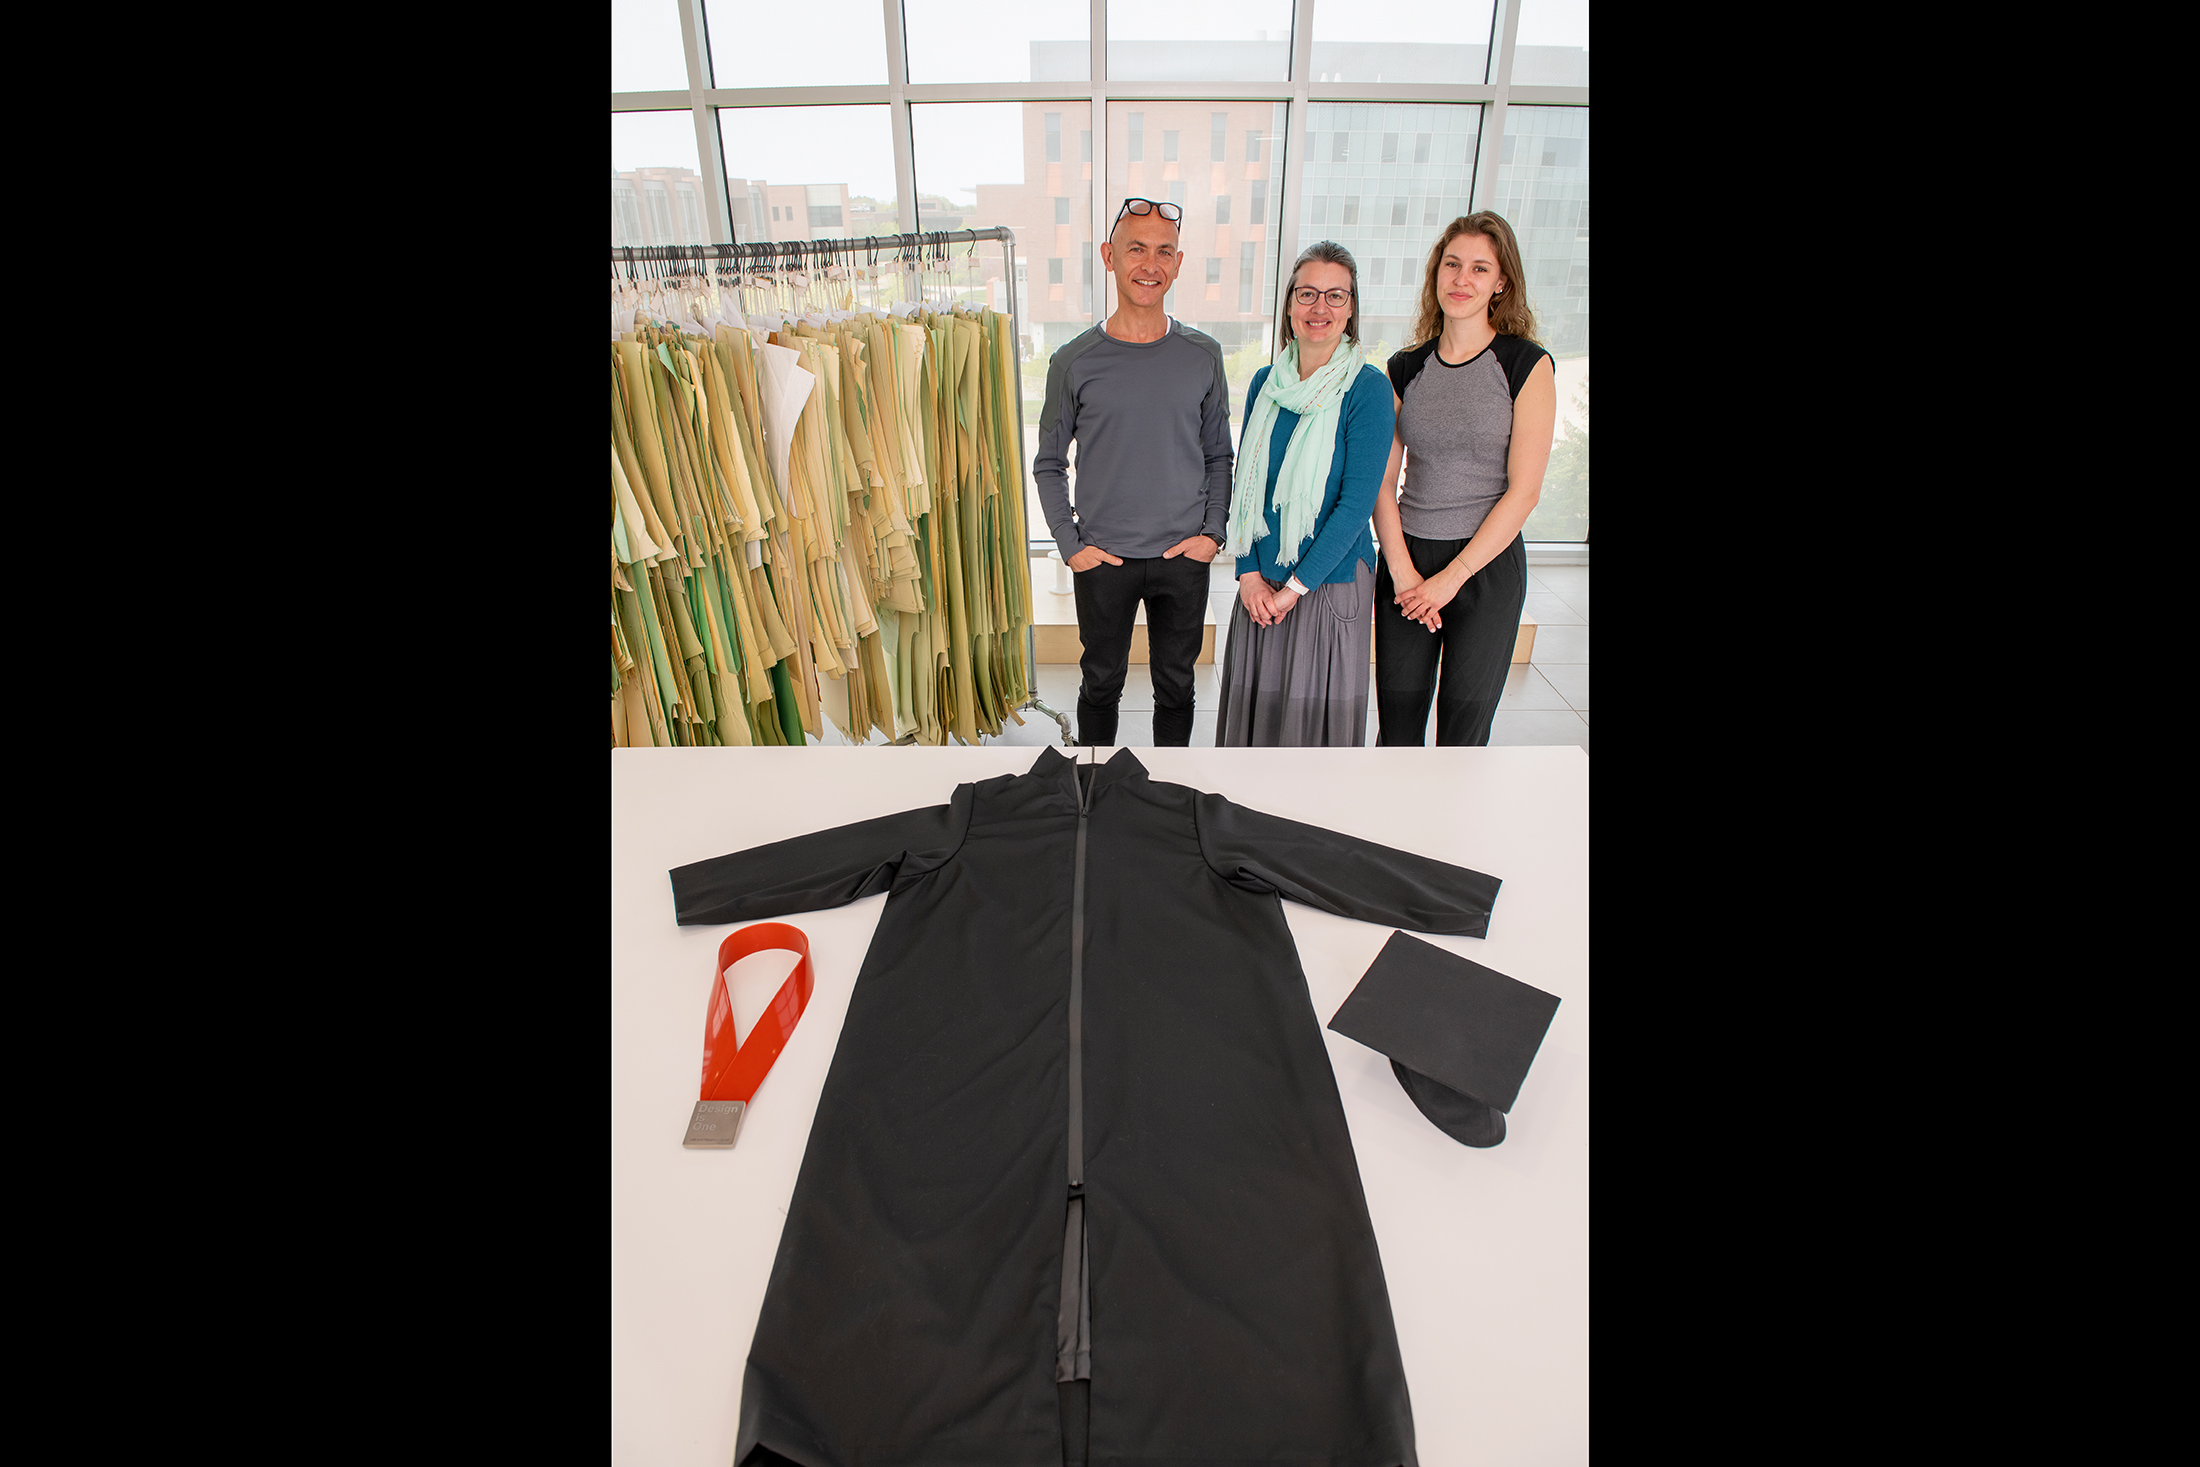 Josh Owen, Melissa Dawson and Clare Maxwell pose in front of Vignelli fabric, while a second photo of regalia using Vignelli fabric sits below.